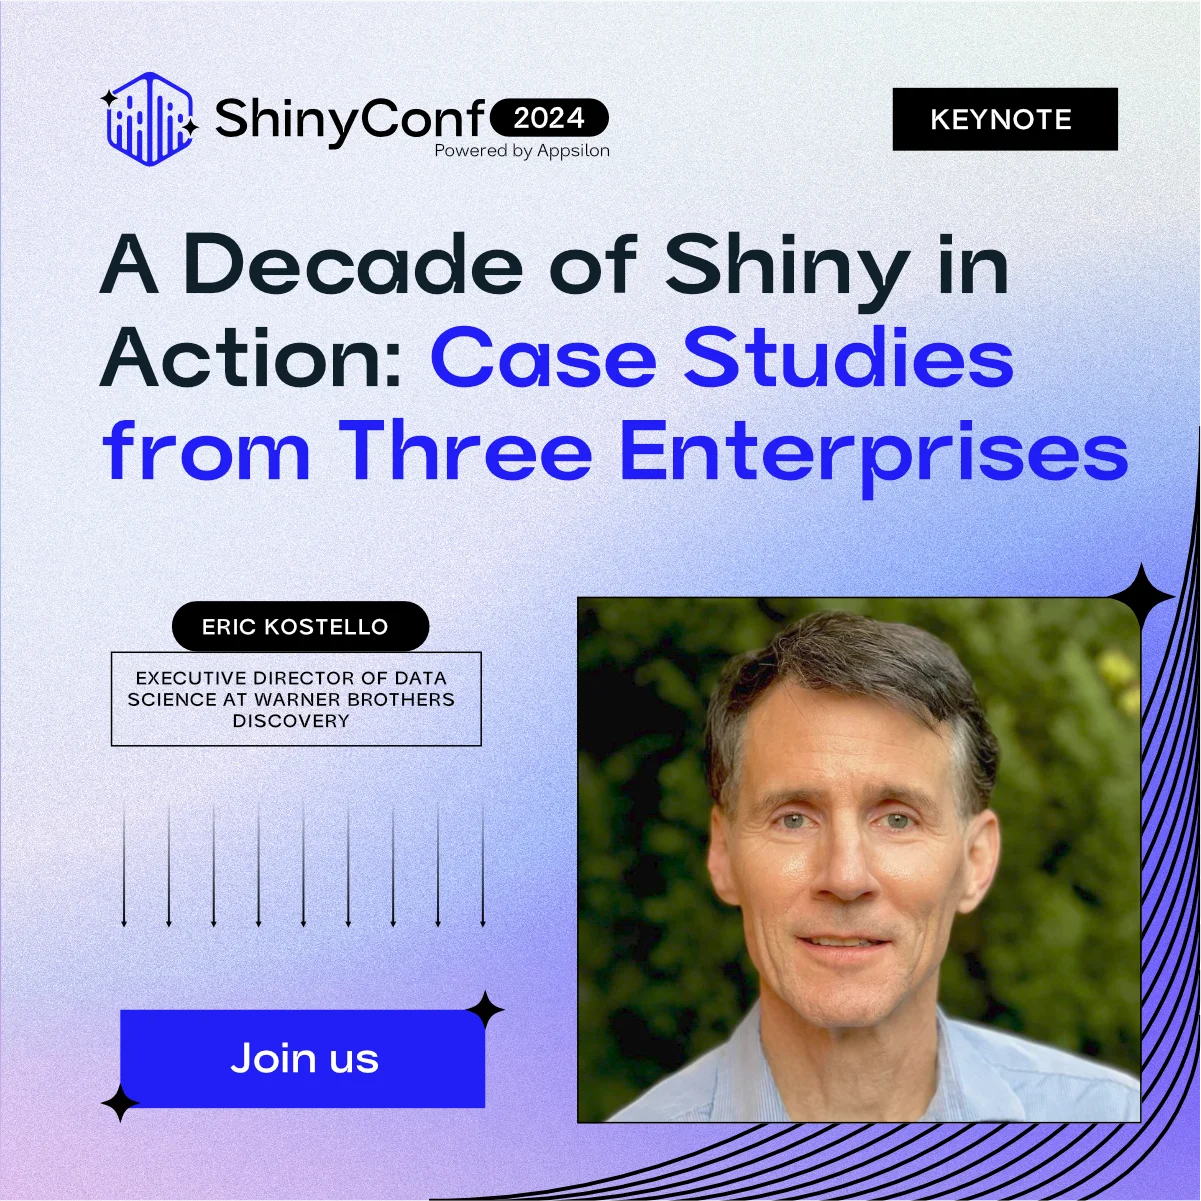 Eric Kostello - A Decade of Shiny in Action: Case Studies from Three Enterprises